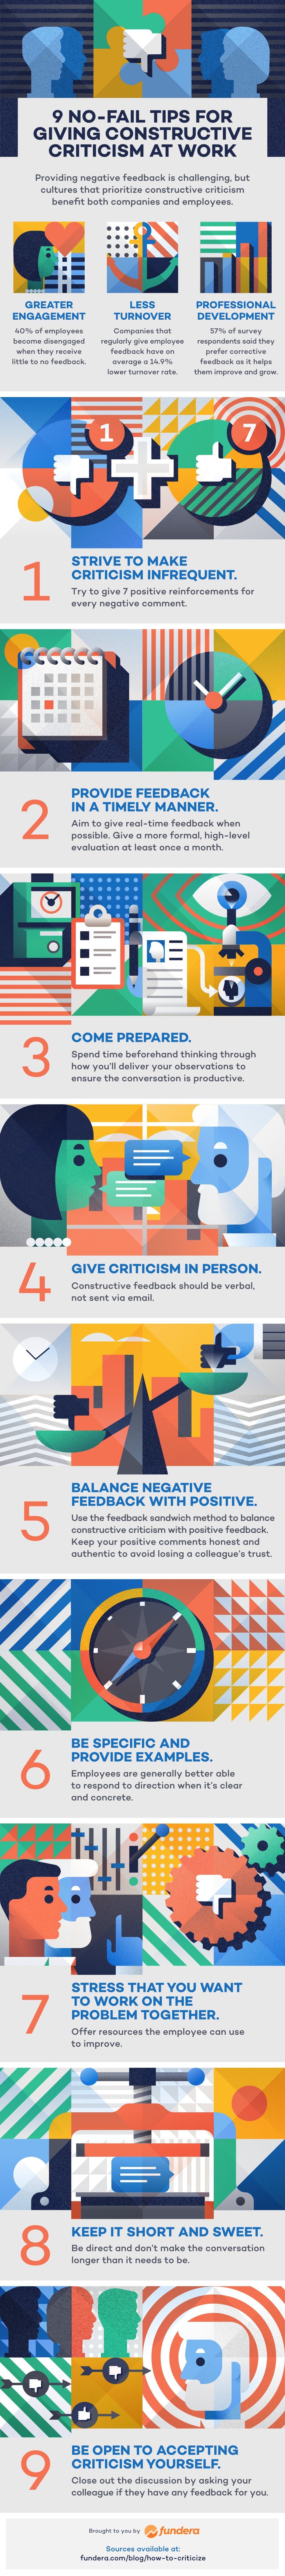 9 No-Fail Tips For Giving Constructive Criticism At Work Infographic